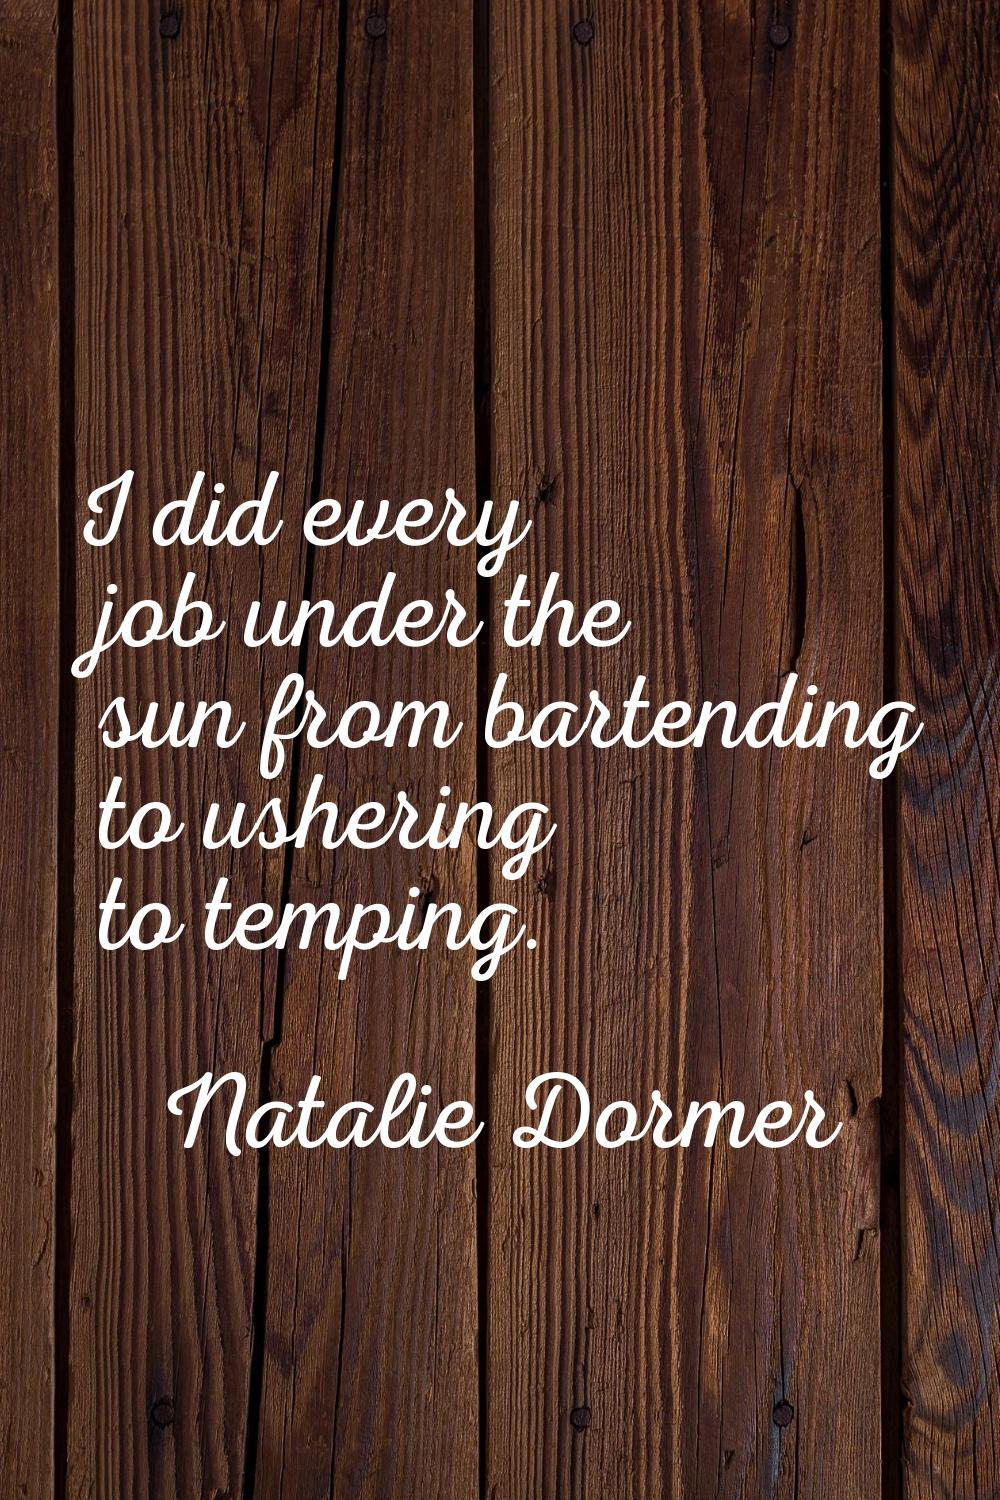 I did every job under the sun from bartending to ushering to temping.